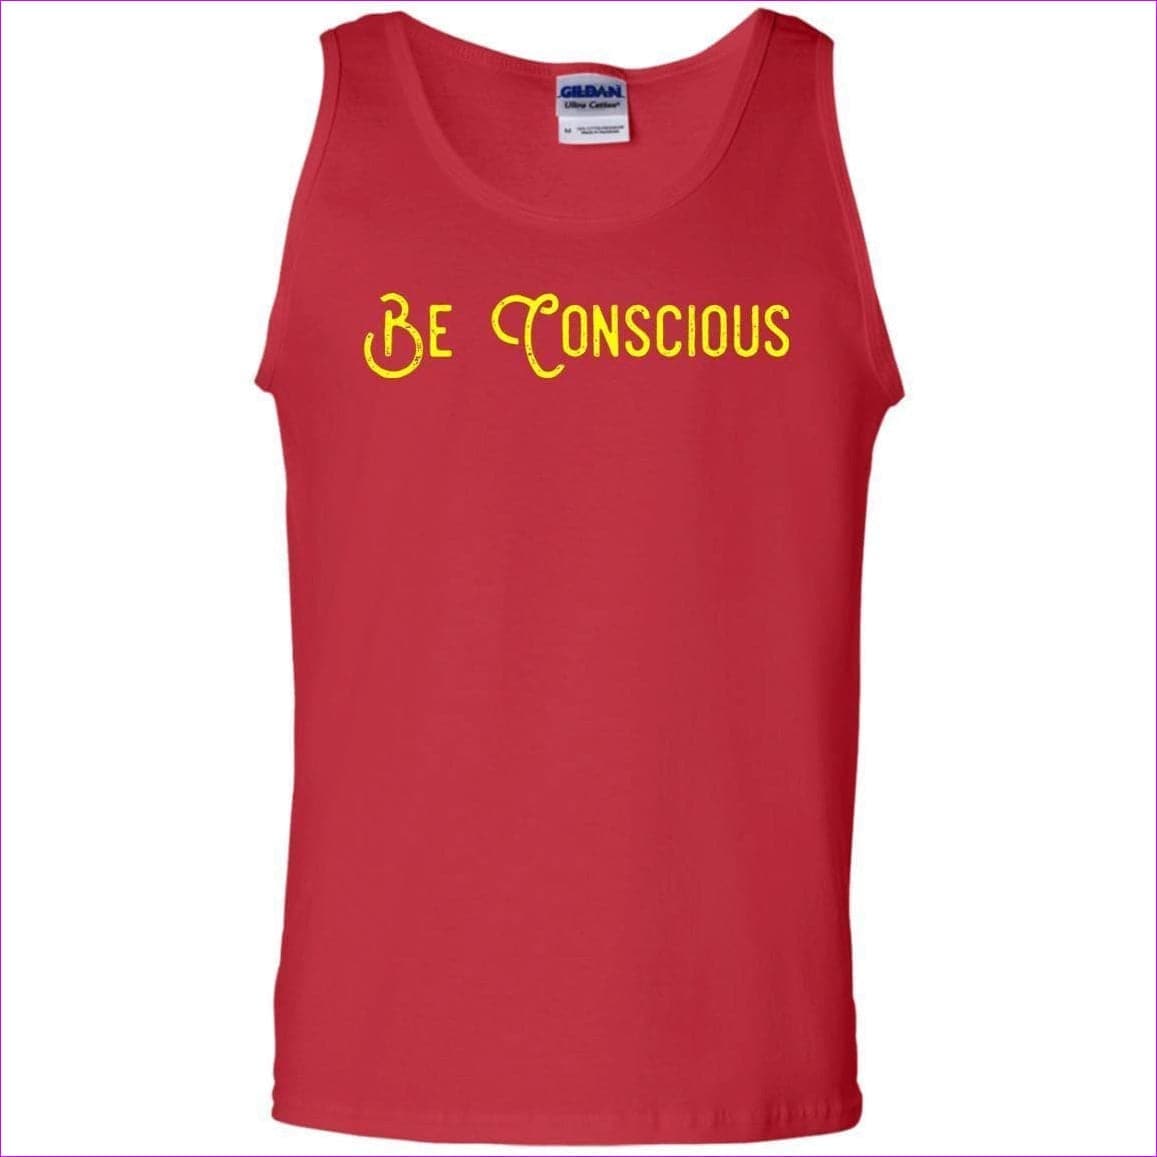 Red Be Conscious 100% Cotton Tank Top - Men's Top at TFC&H Co.